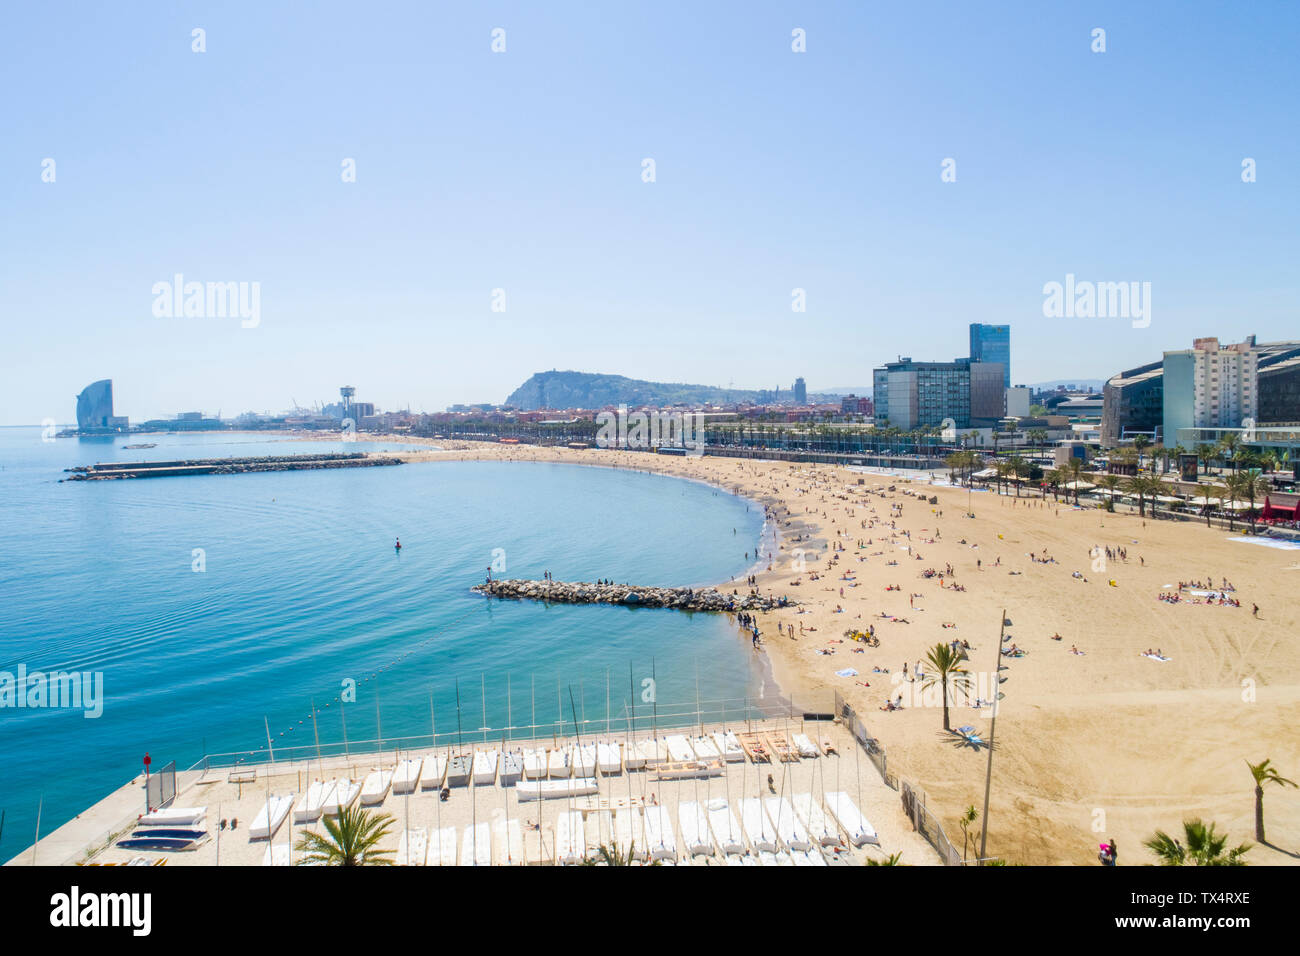 Spain, Barcelona, view to the beach from above Stock Photo